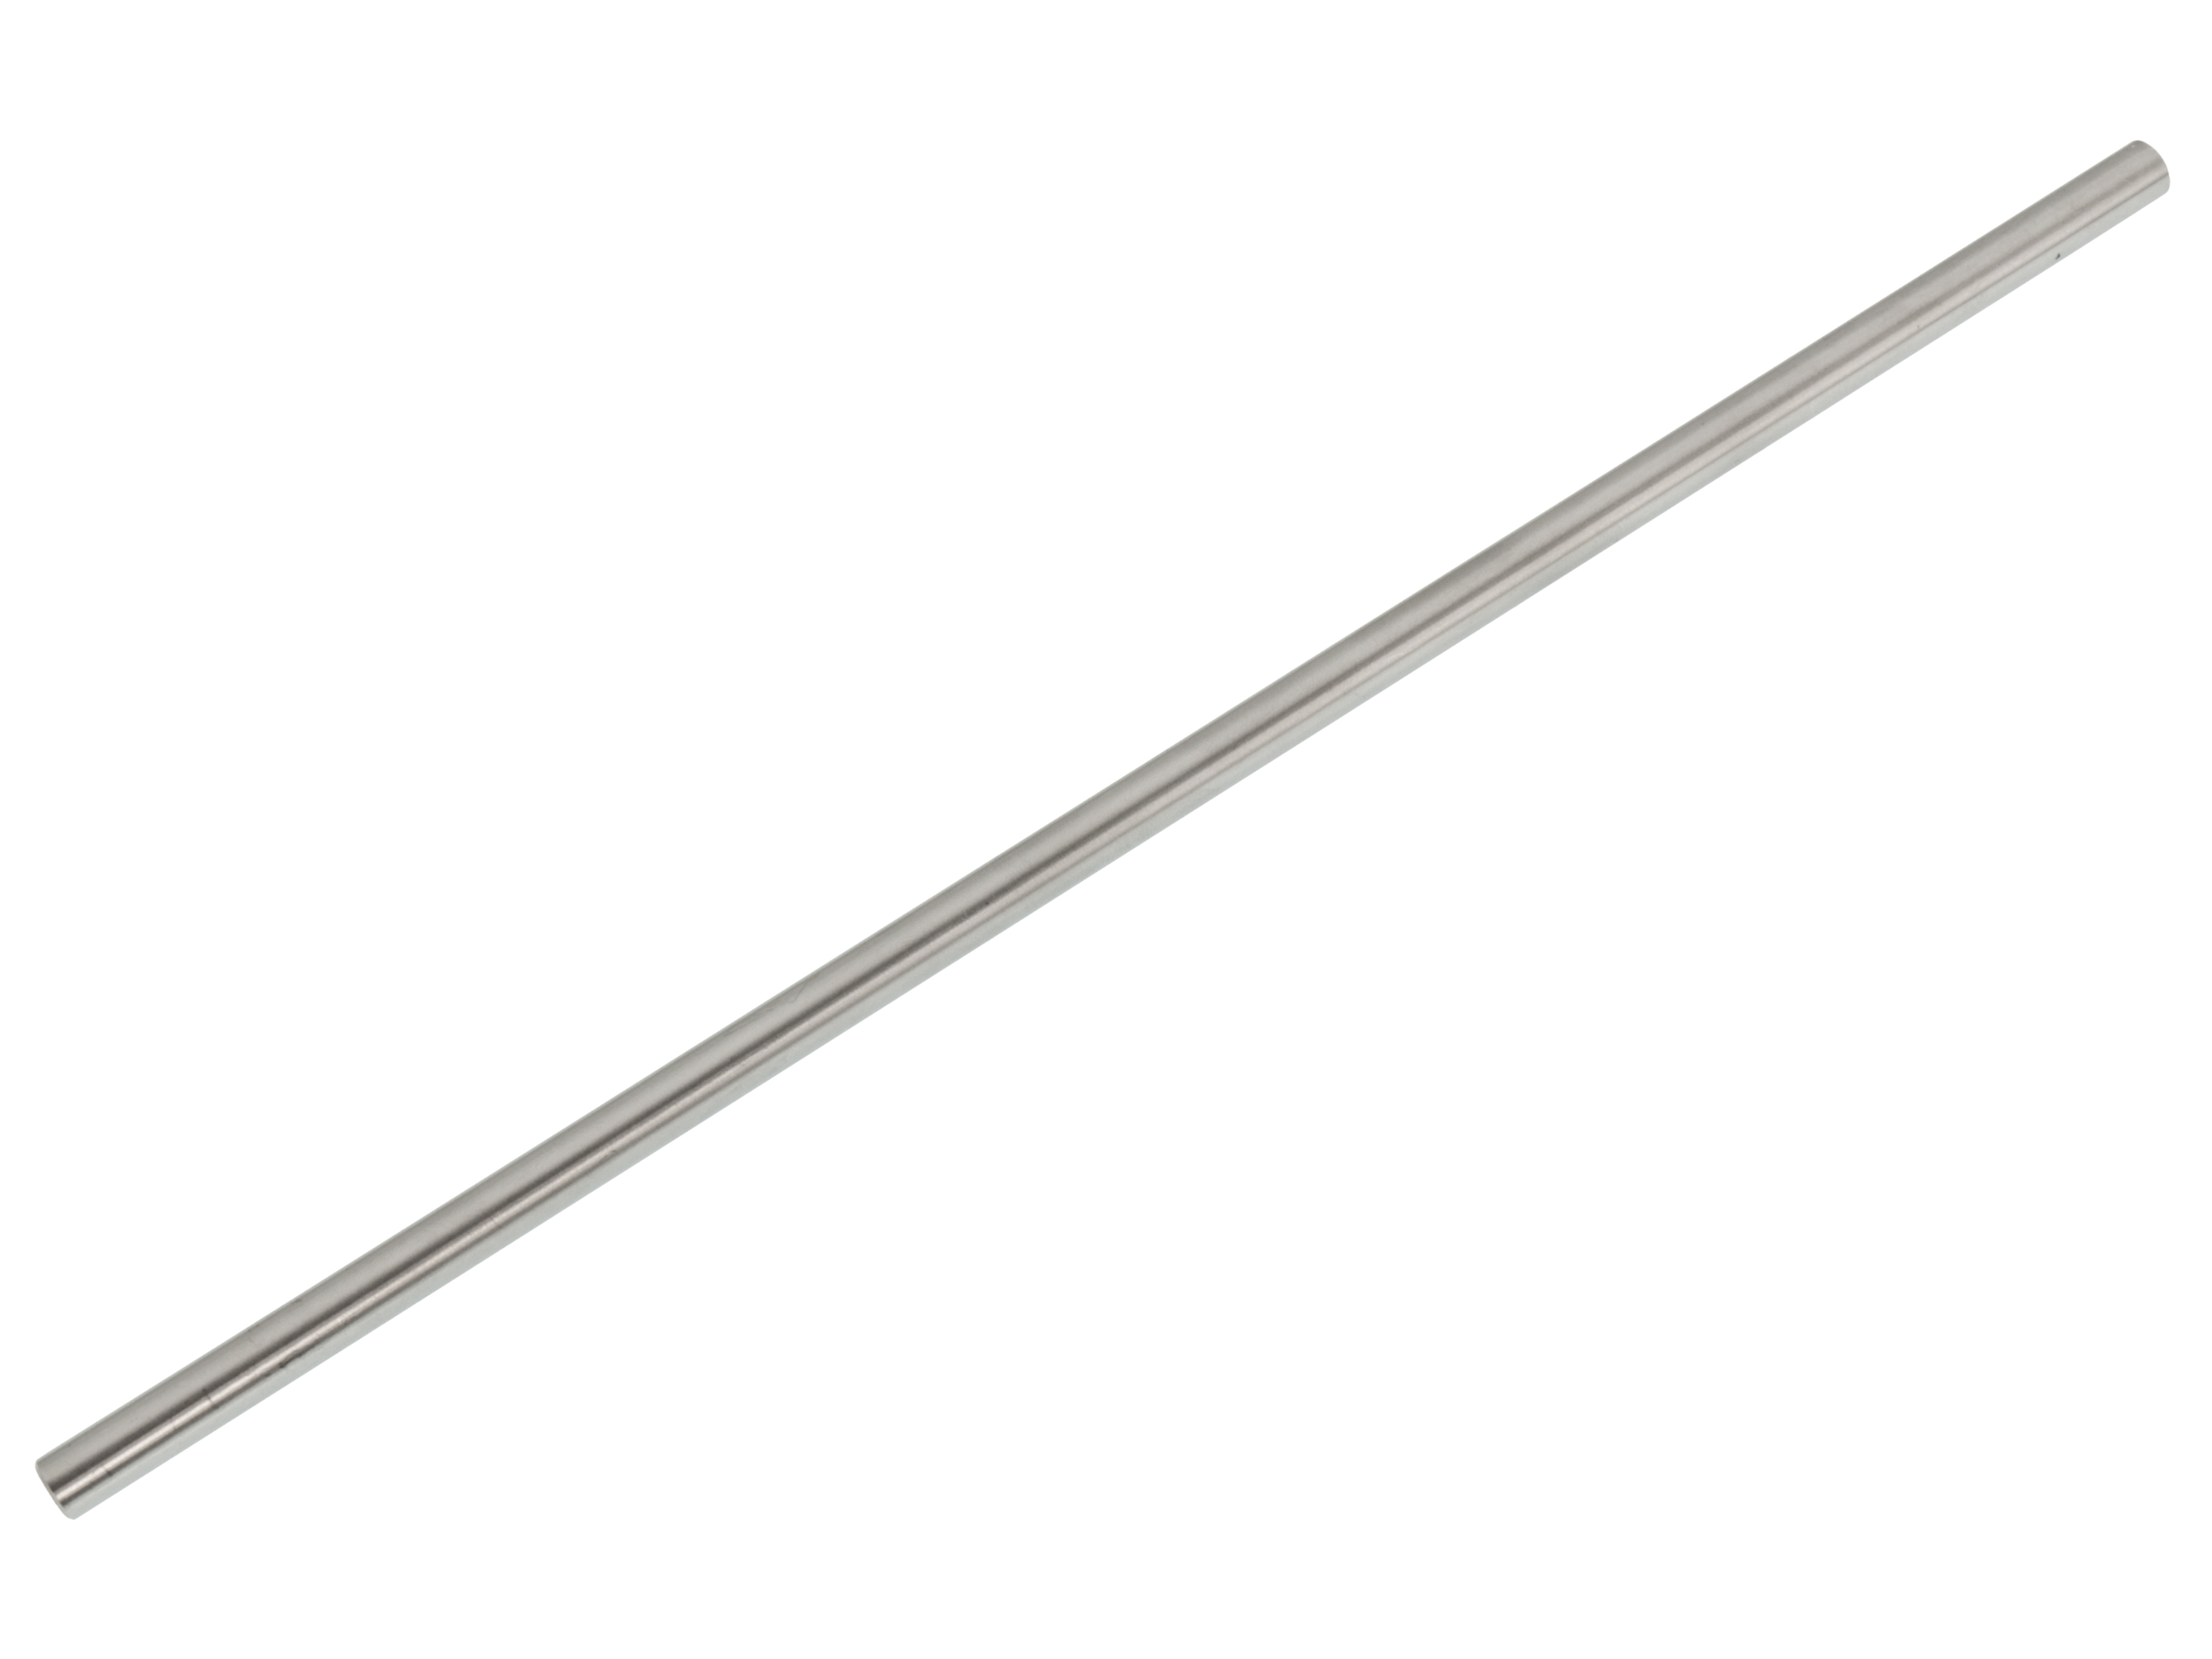 Shaft stainless steel 8mm x 300mm @ electrokit